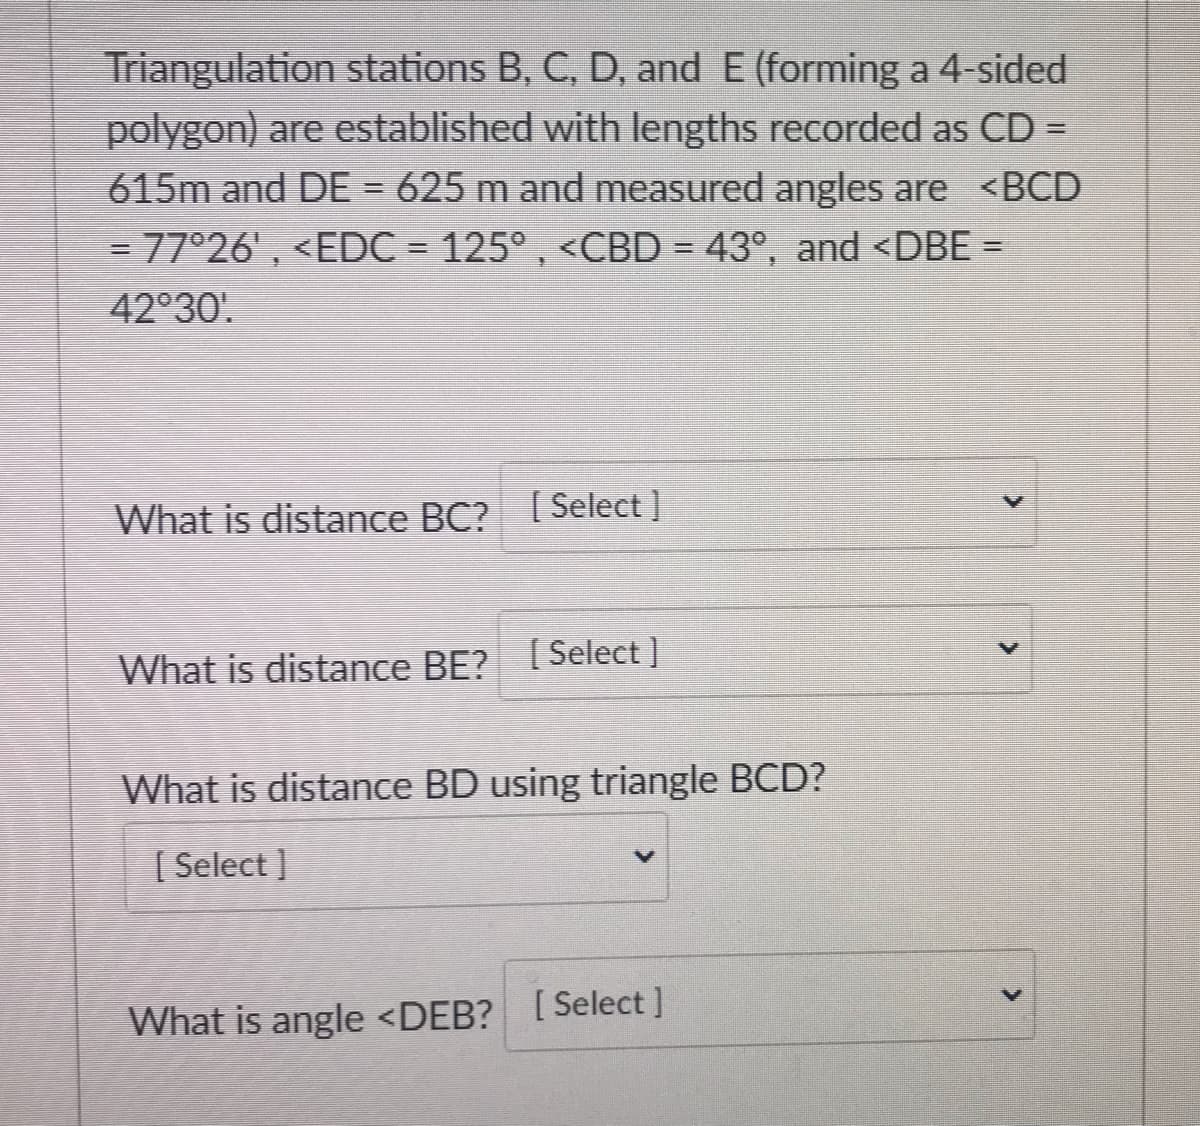 Triangulation stations B, C, D, and E (forming a 4-sided
polygon) are established with lengths recorded as CD =
615m and DE = 625 m and measured angles are <BCD
= 77°26' , <EDC = 125° , <CBD = 43°, and <DBE =
42°30'.
What is distance BC? [Select]
What is distance BE? [Select ]
What is distance BD using triangle BCD?
[ Select ]
What is angle <DEB? [Select]
